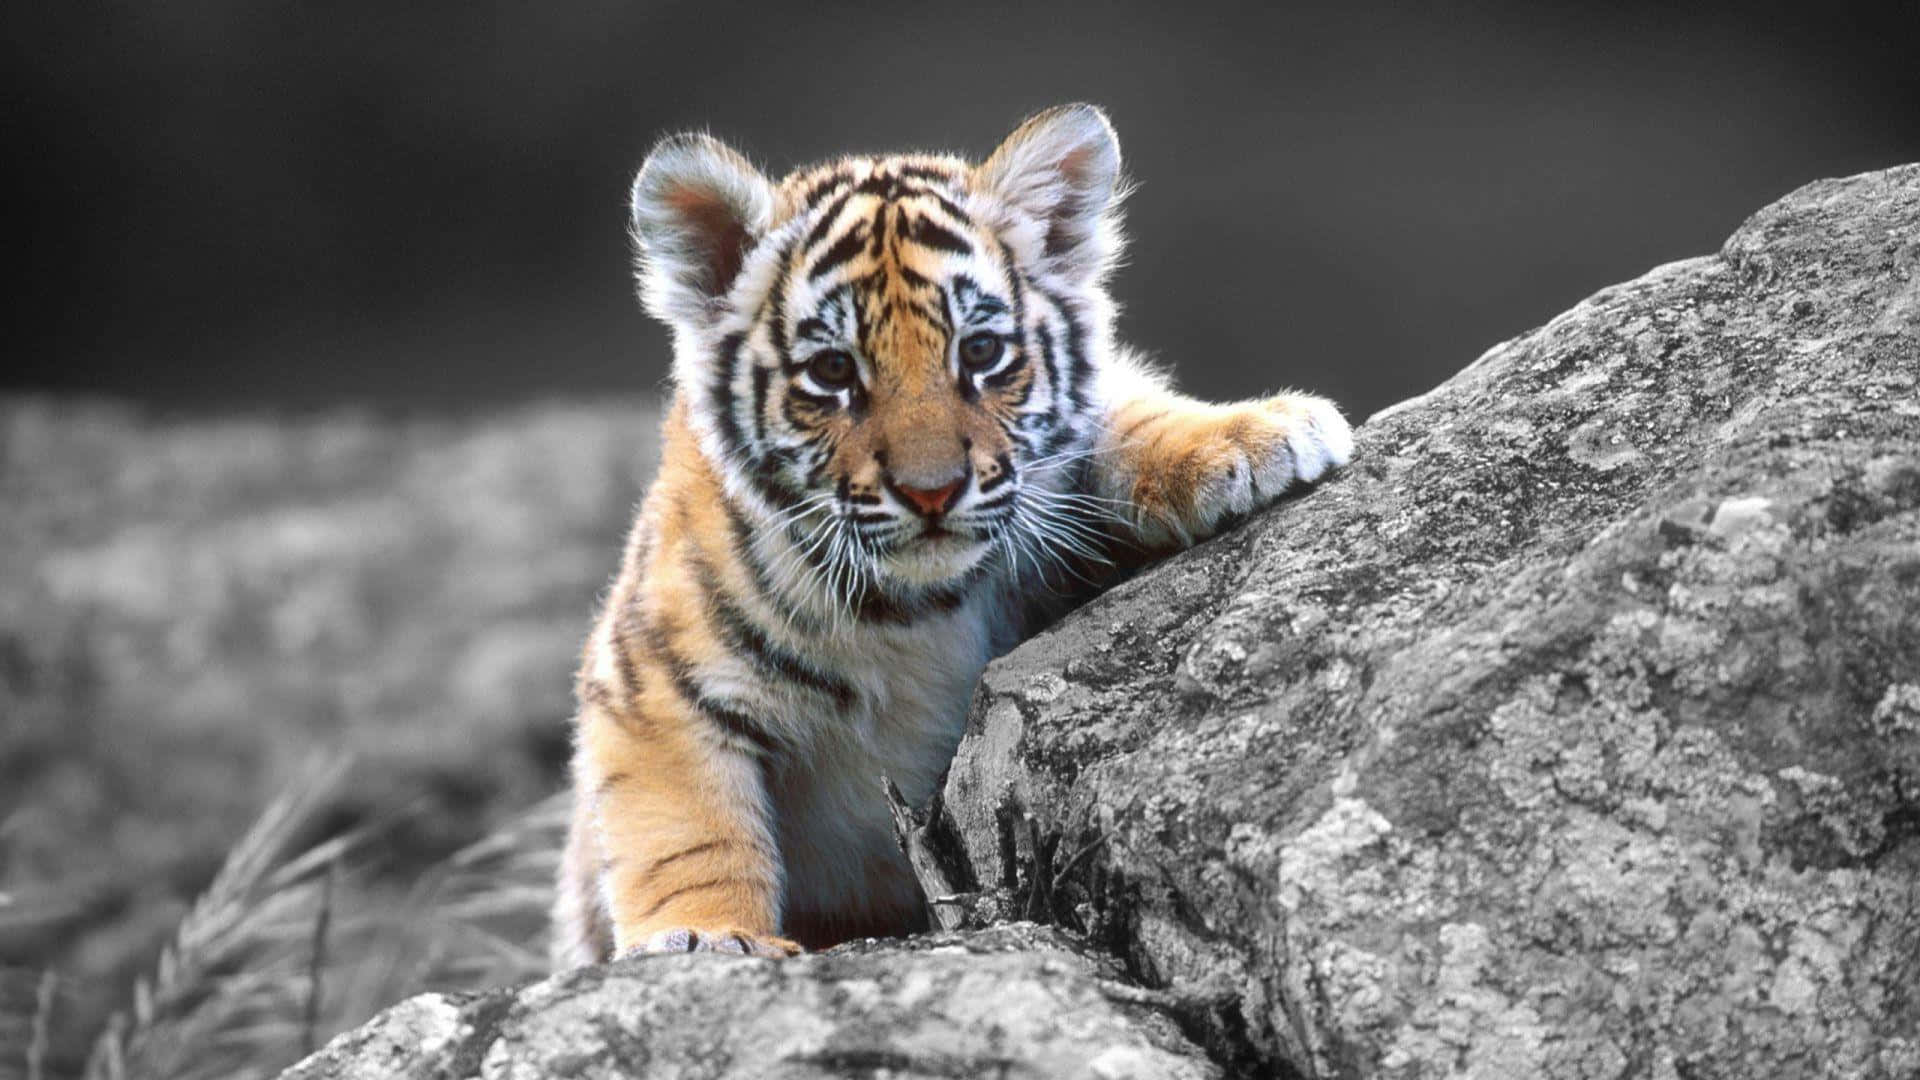 Download Adorable Cub: Playful Tiny Tiger in the Wild | Wallpapers.com